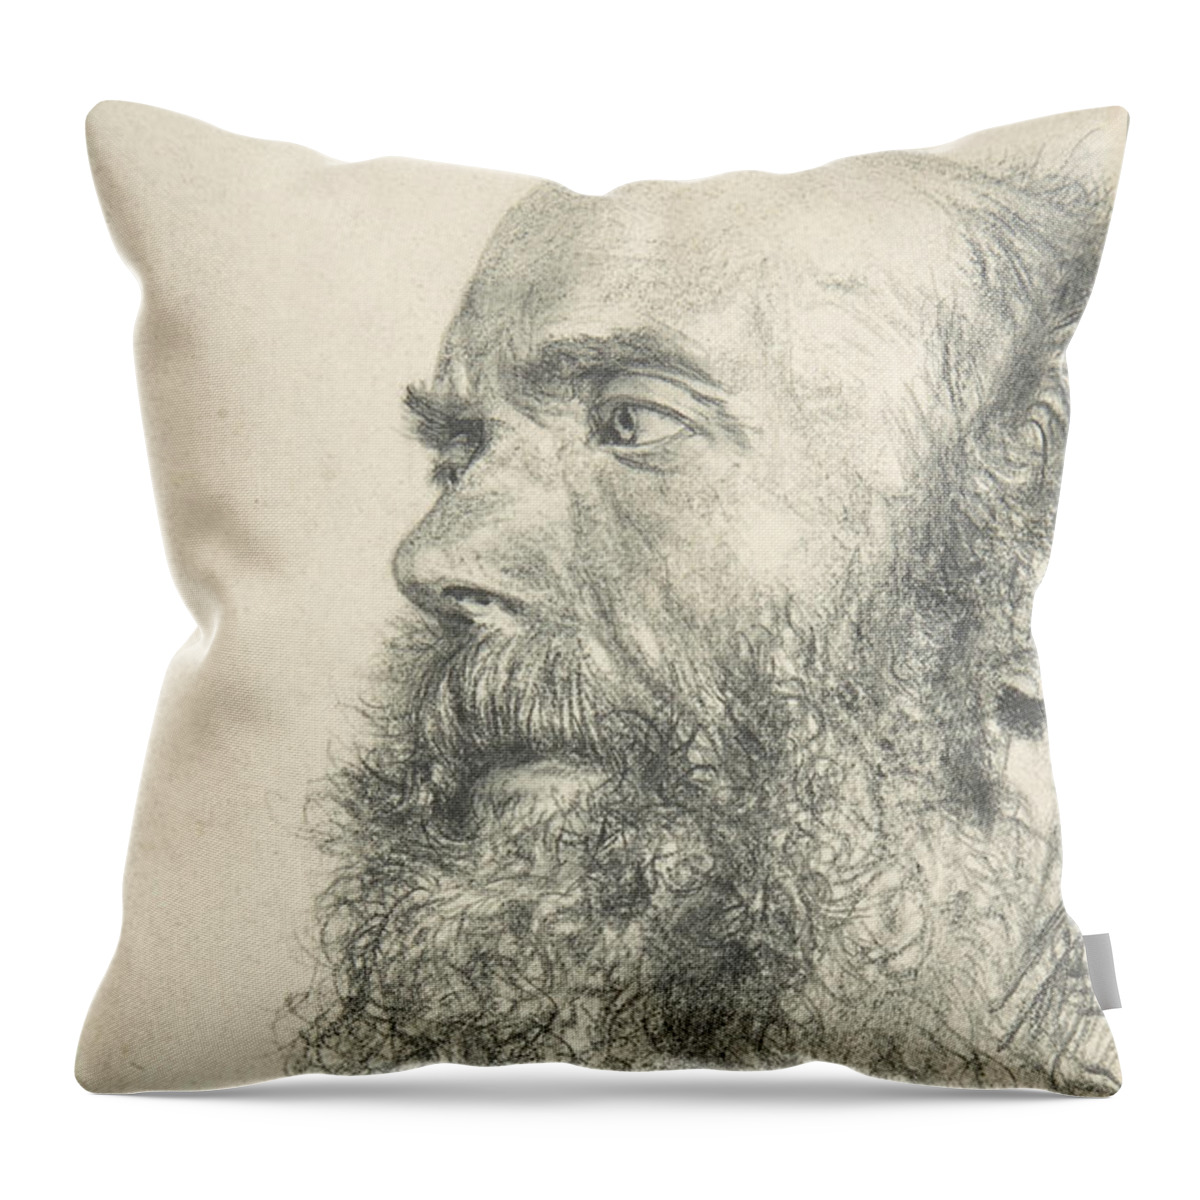 19th Century Art Throw Pillow featuring the drawing Head of a Bearded Man by Adolph Menzel